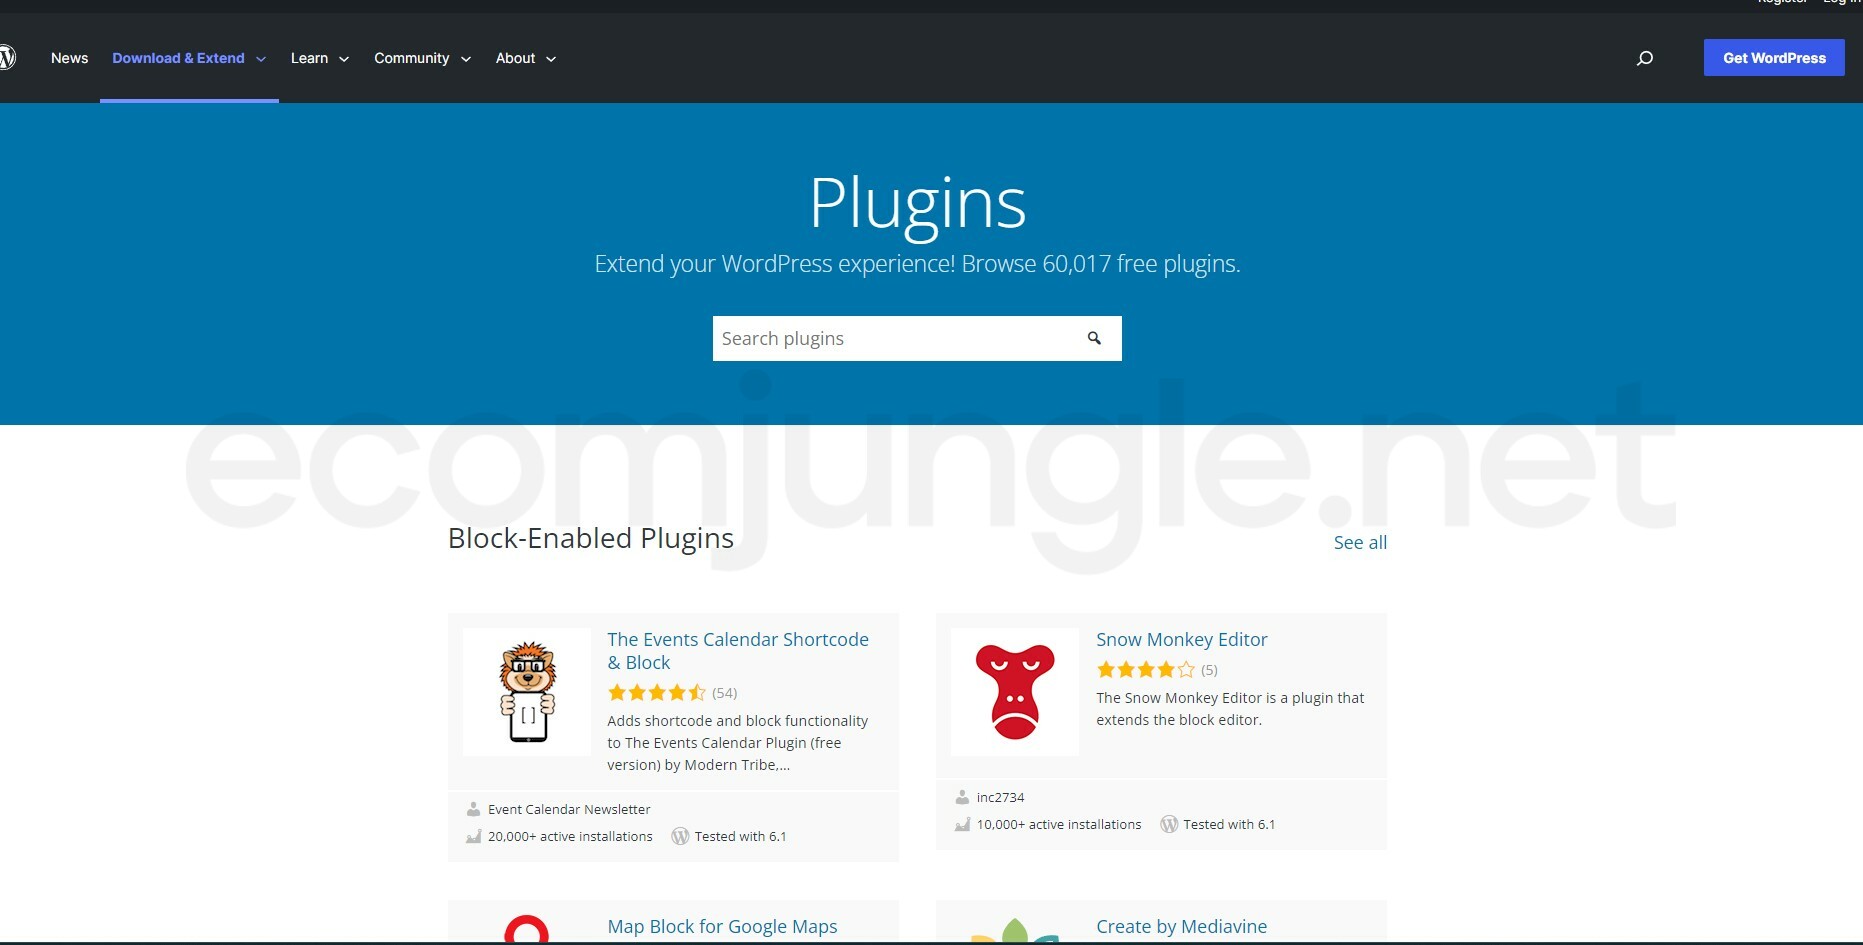 Where Can You Find WordPress Plugins